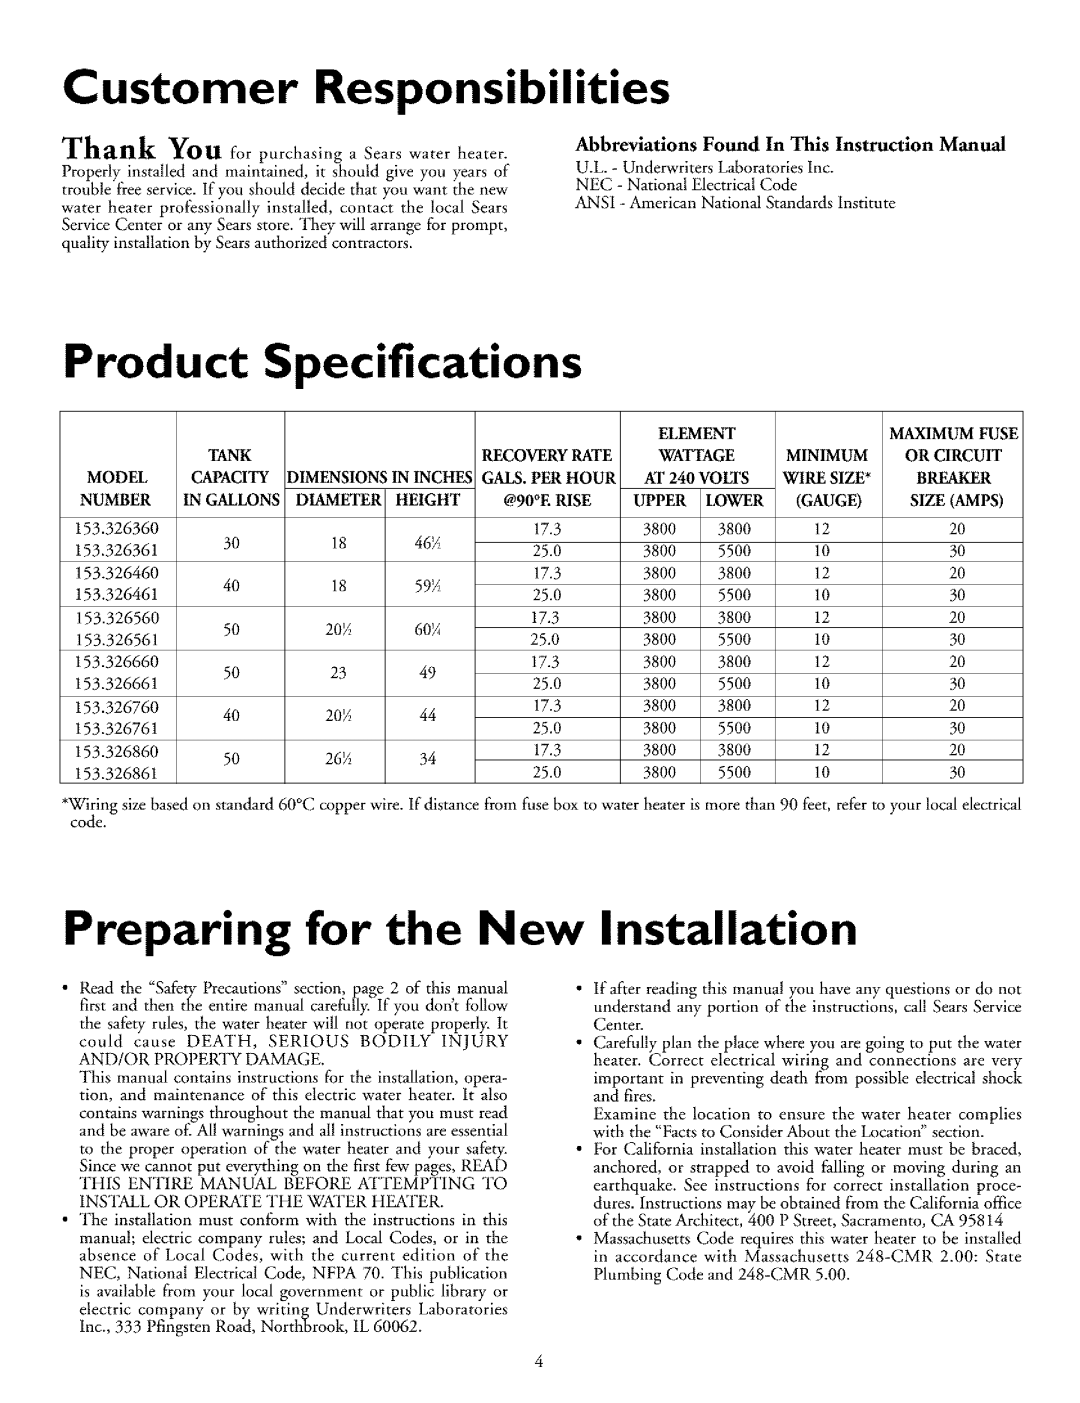 Kenmore 153.32656, 153.326761 Customer Responsibilities, Preparing for the New Installation, Specifications, Product 